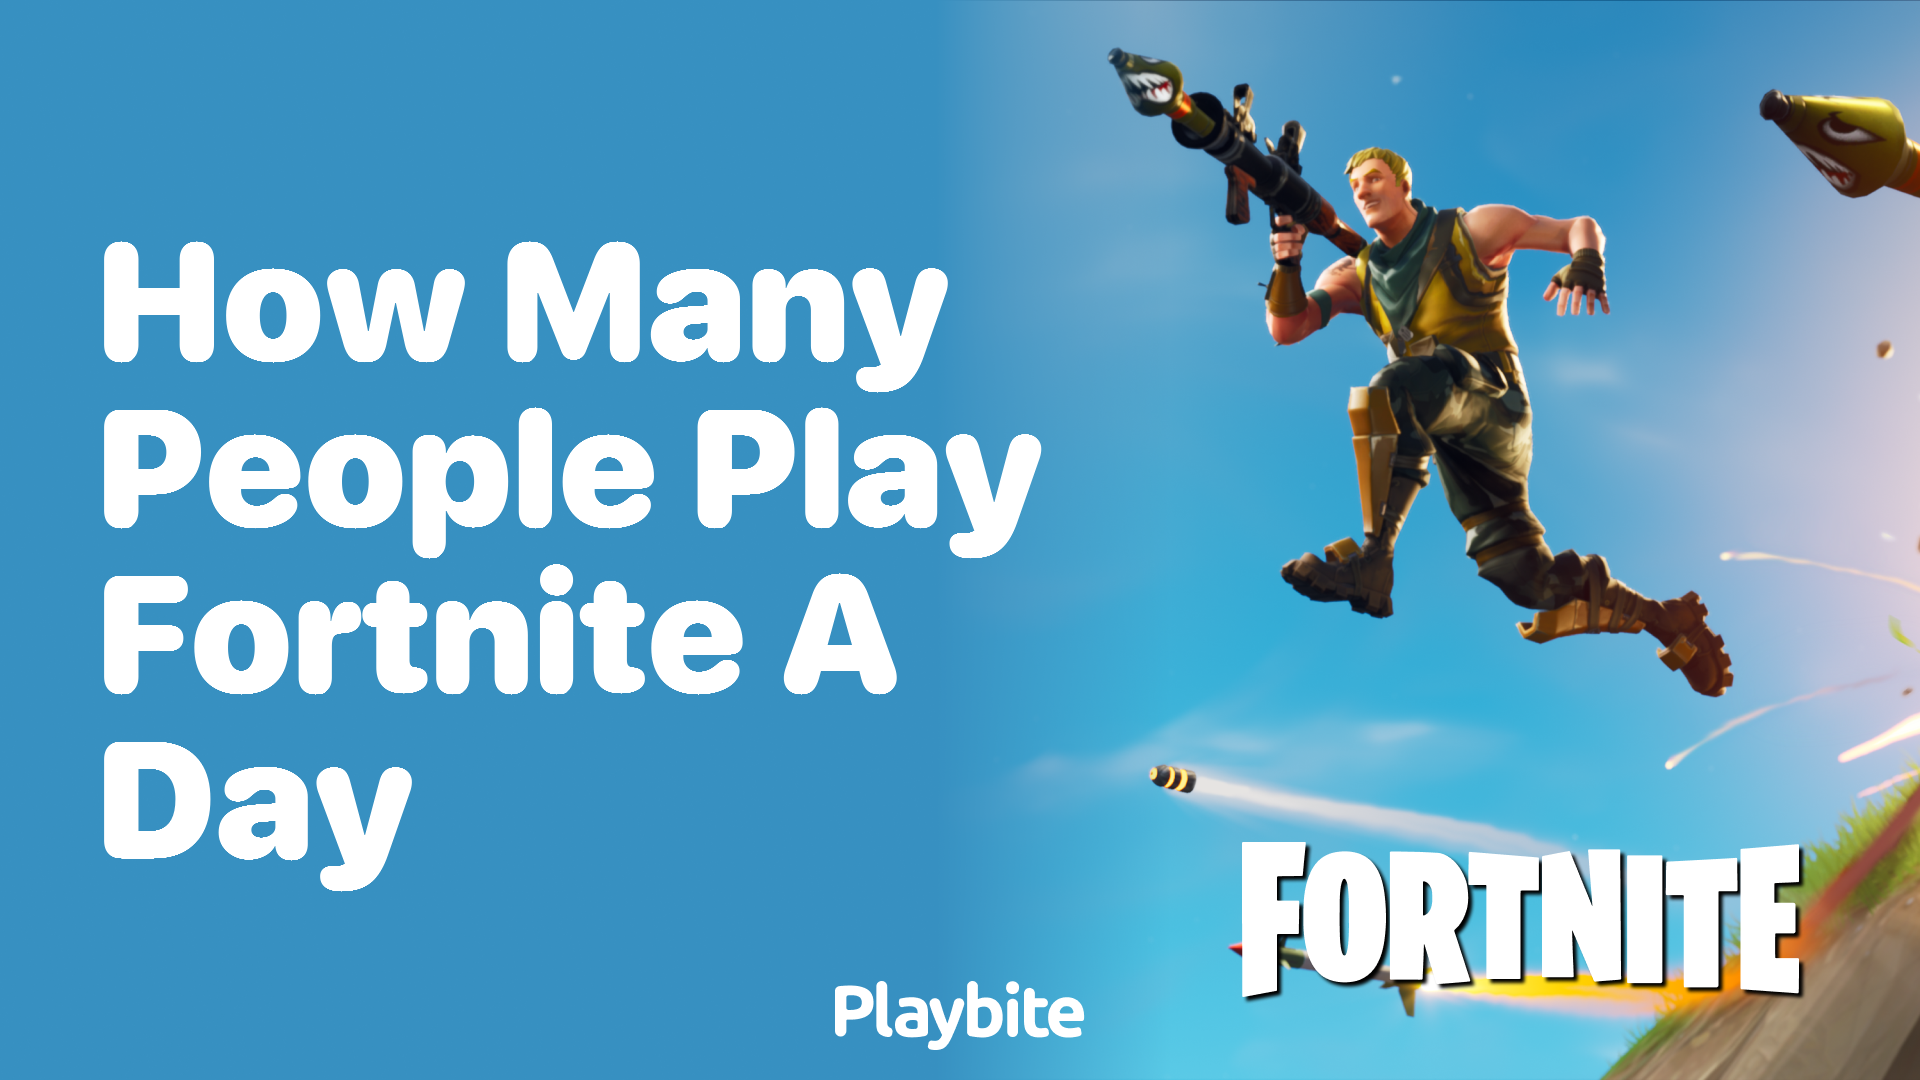 How Many People Play Fortnite a Day?